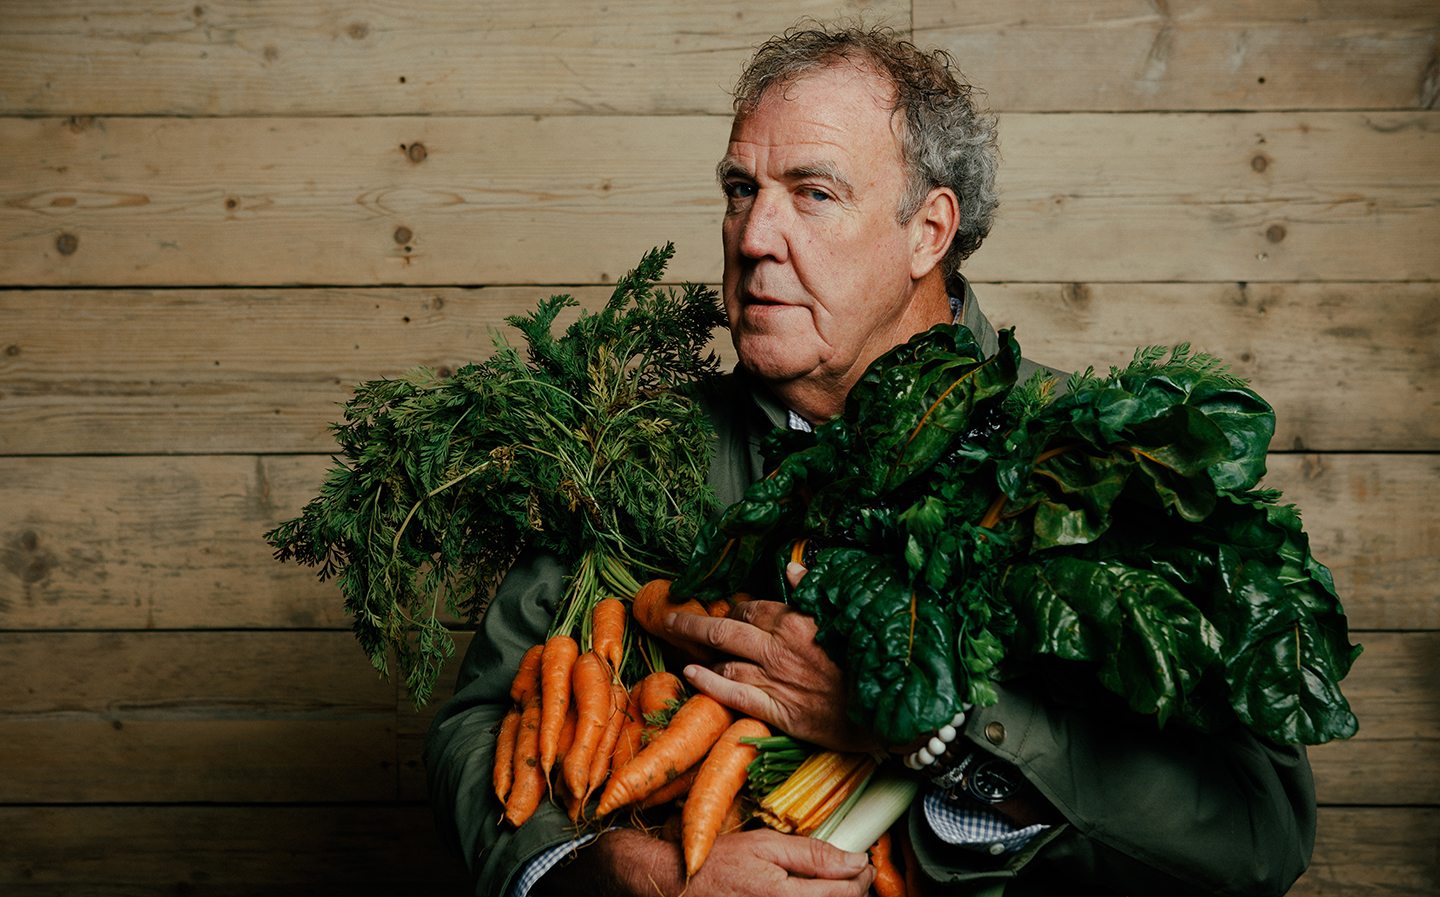 Gulp: Jeremy Clarkson has created some 'plain' recipes for The Sunday Times magazine